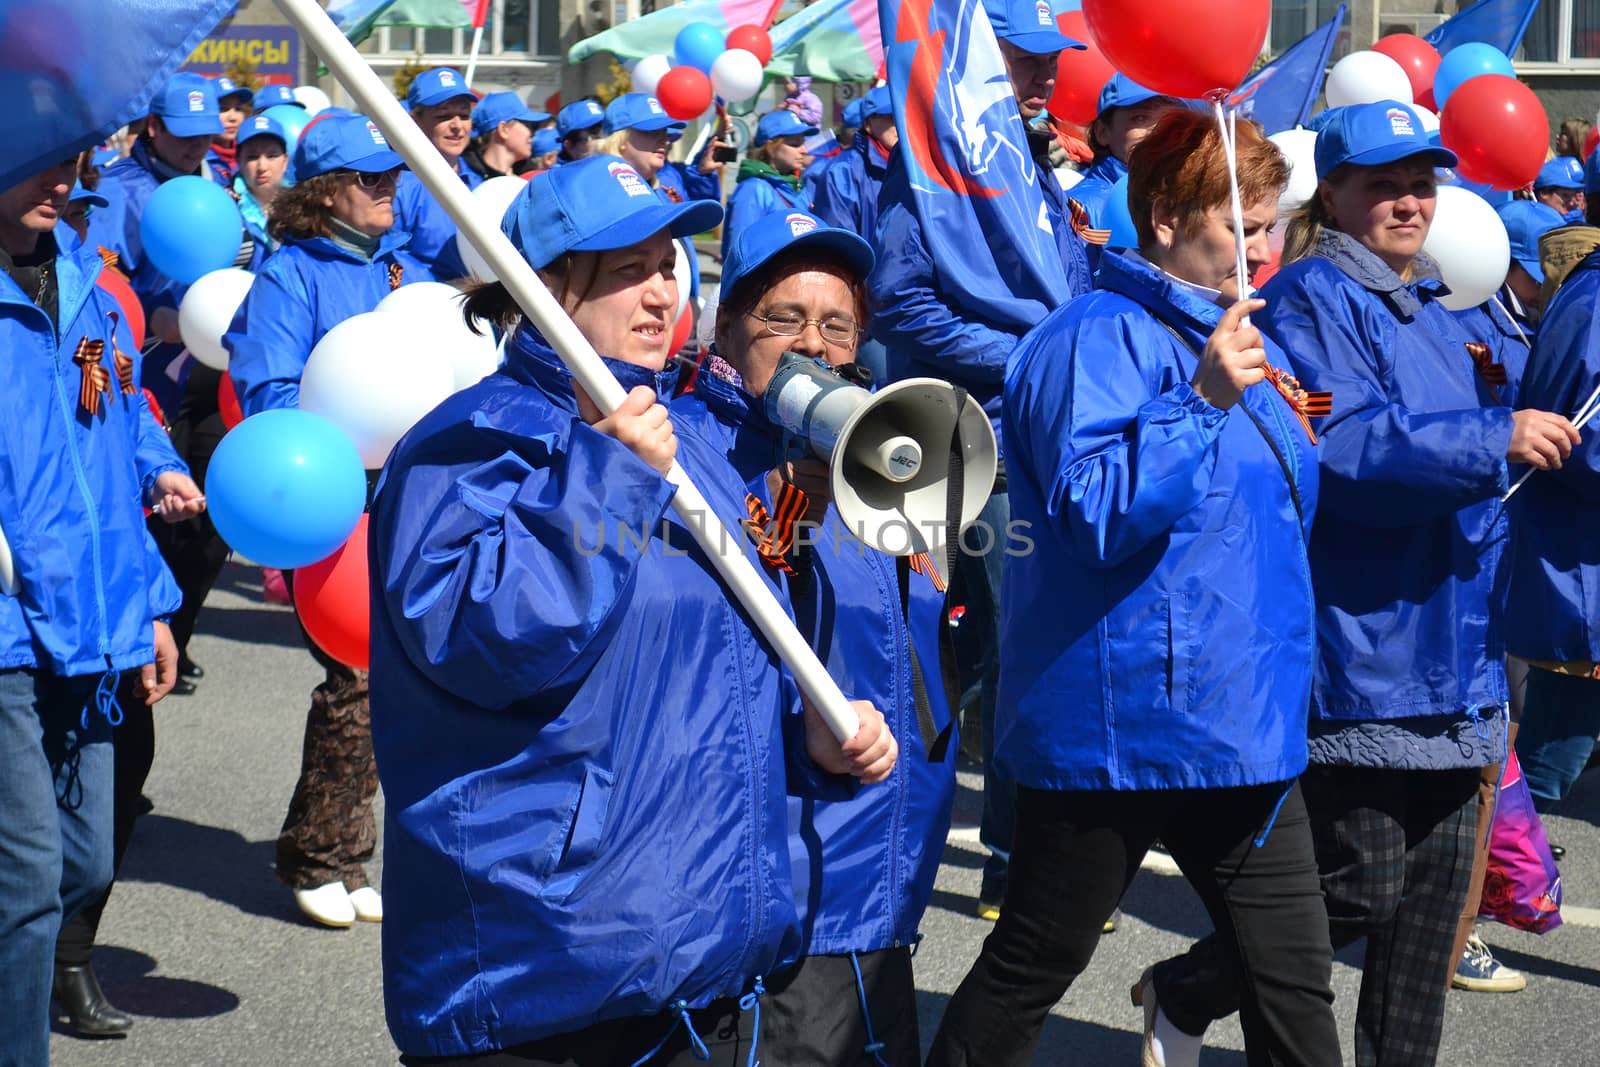 Parade on the Victory Day on May 9, 2016. Representatives of United Russia Party. Tyumen, Russia